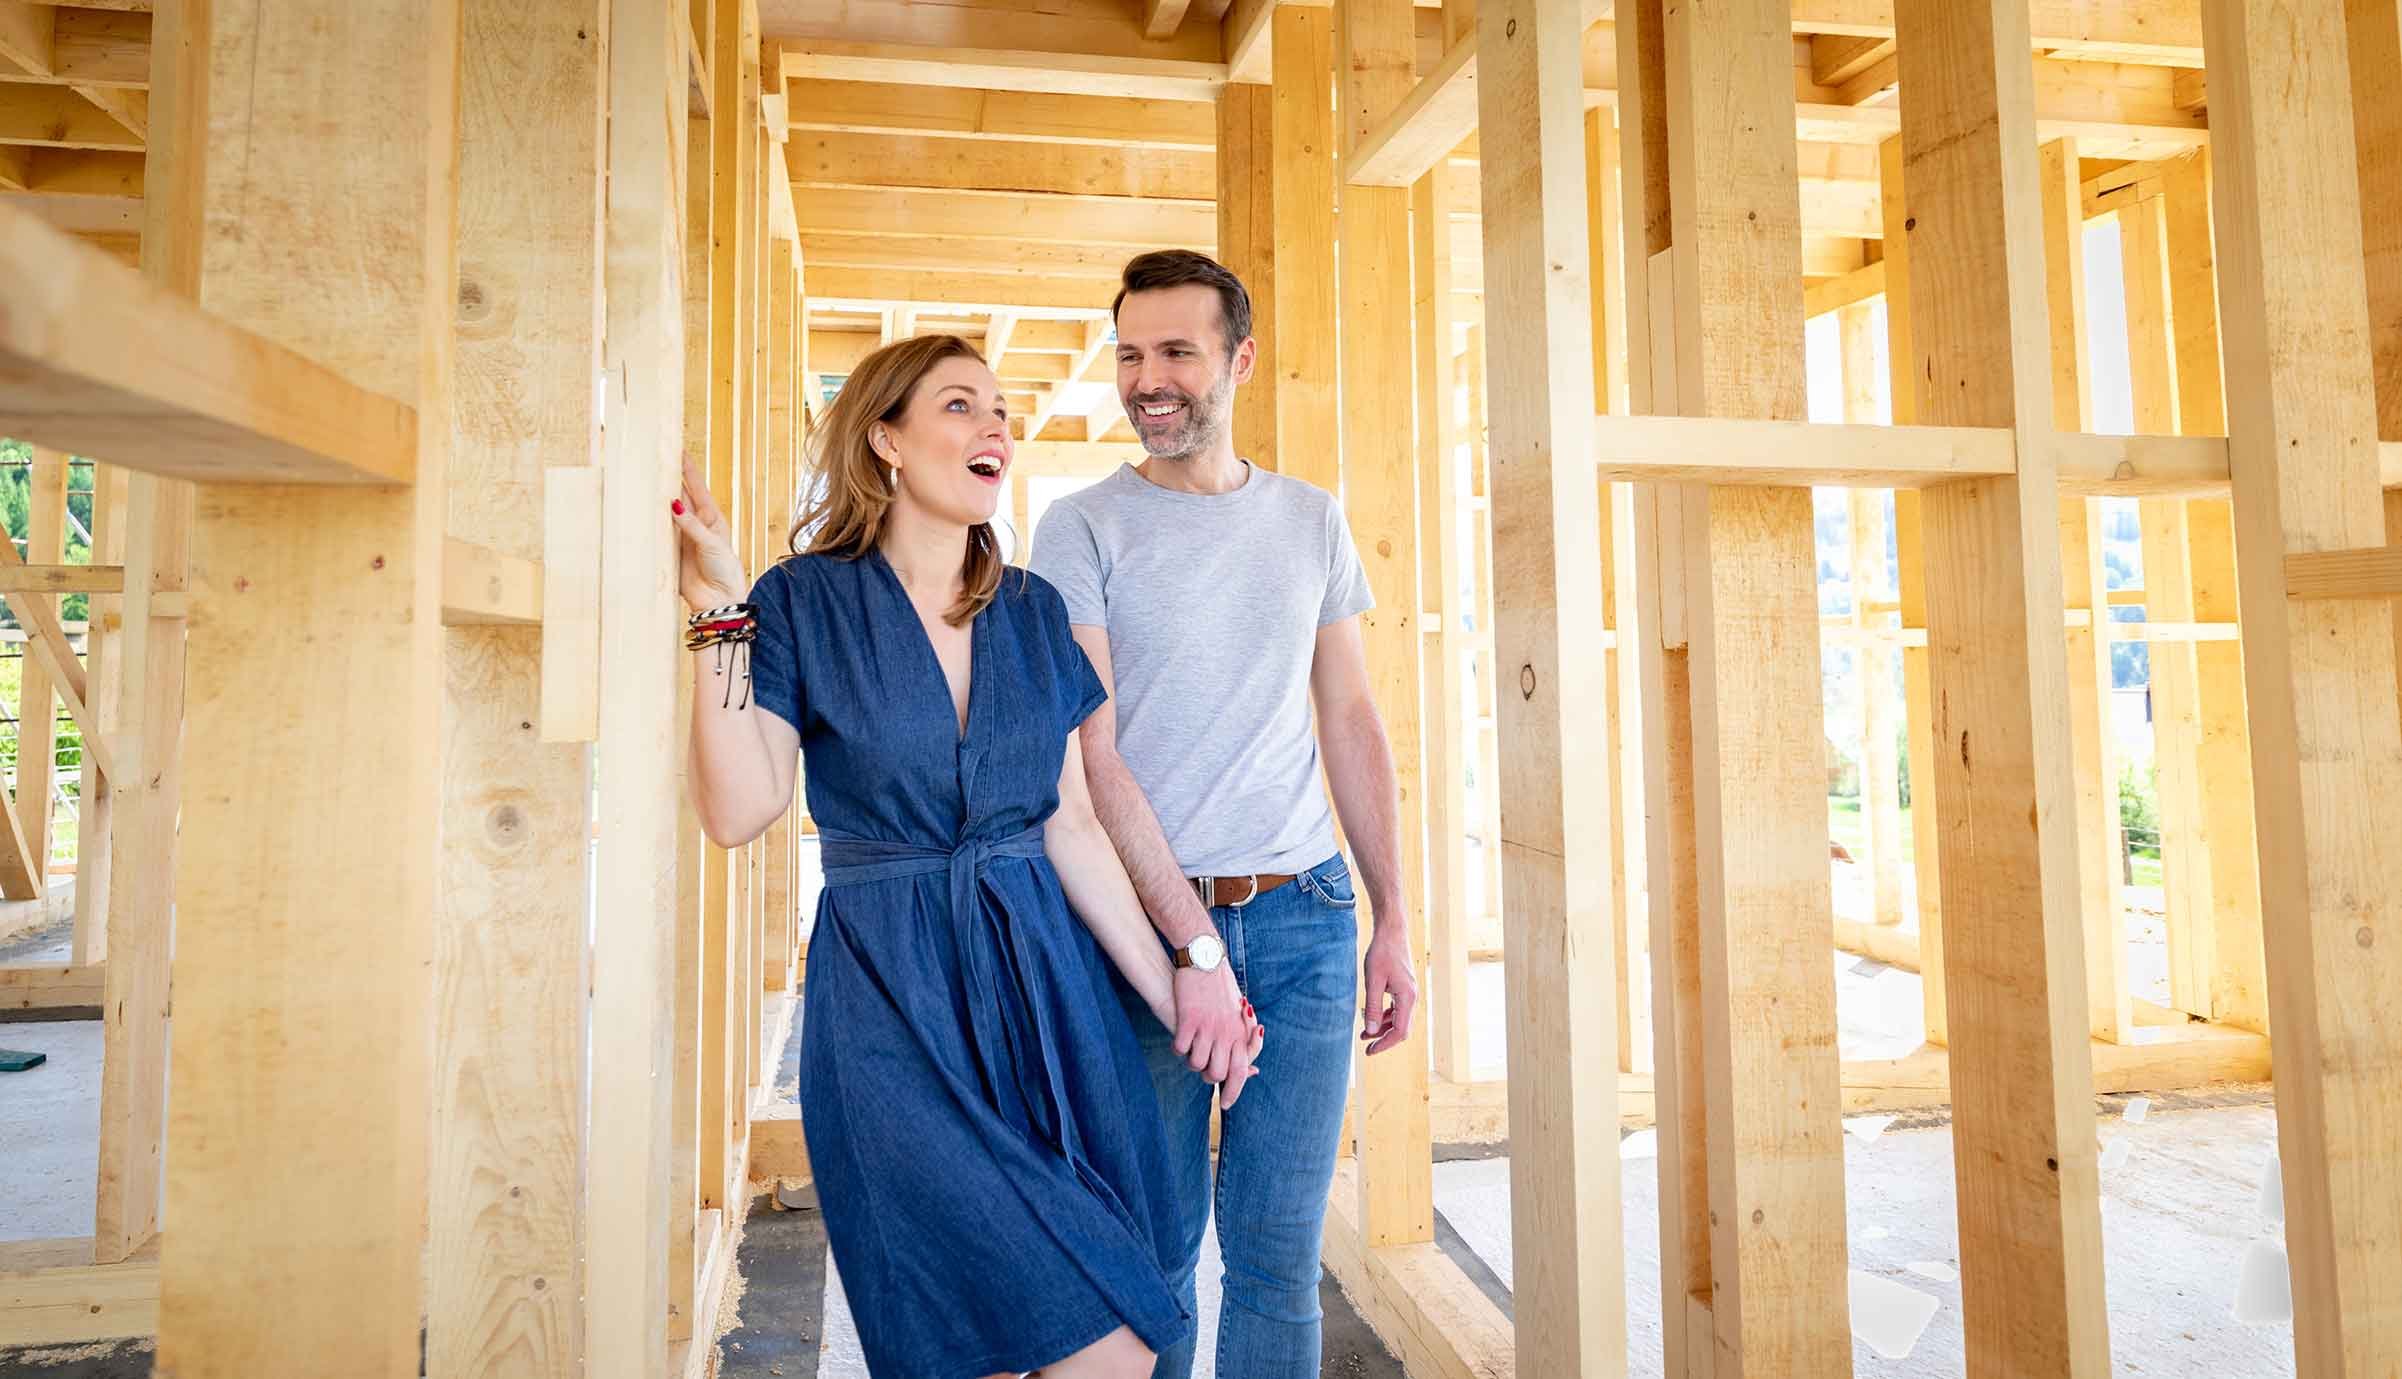 Smiling-couple-walking-through-a-home-under-construction